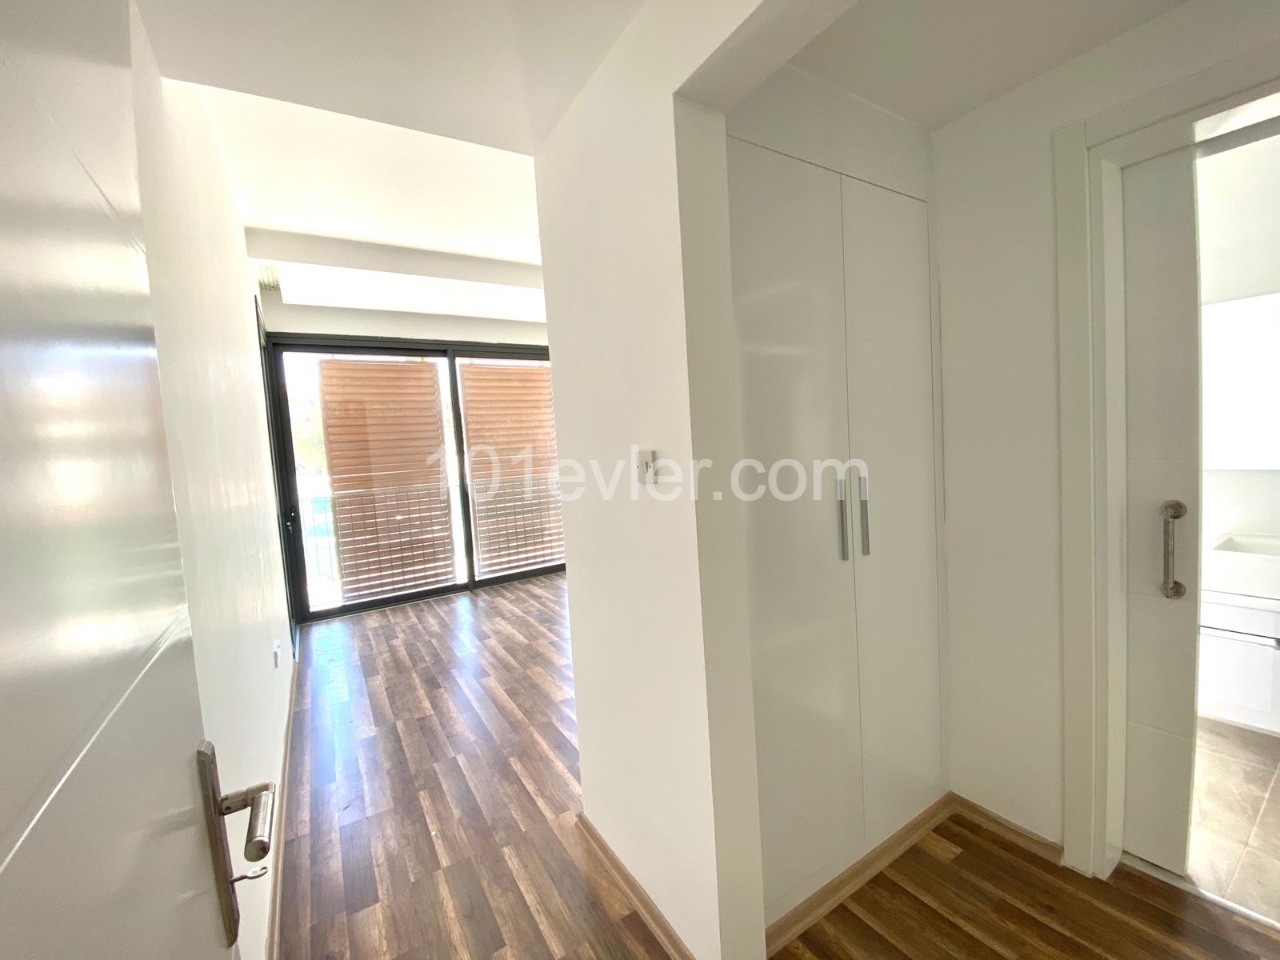 3 bedroom flat for sale in Nicosia 